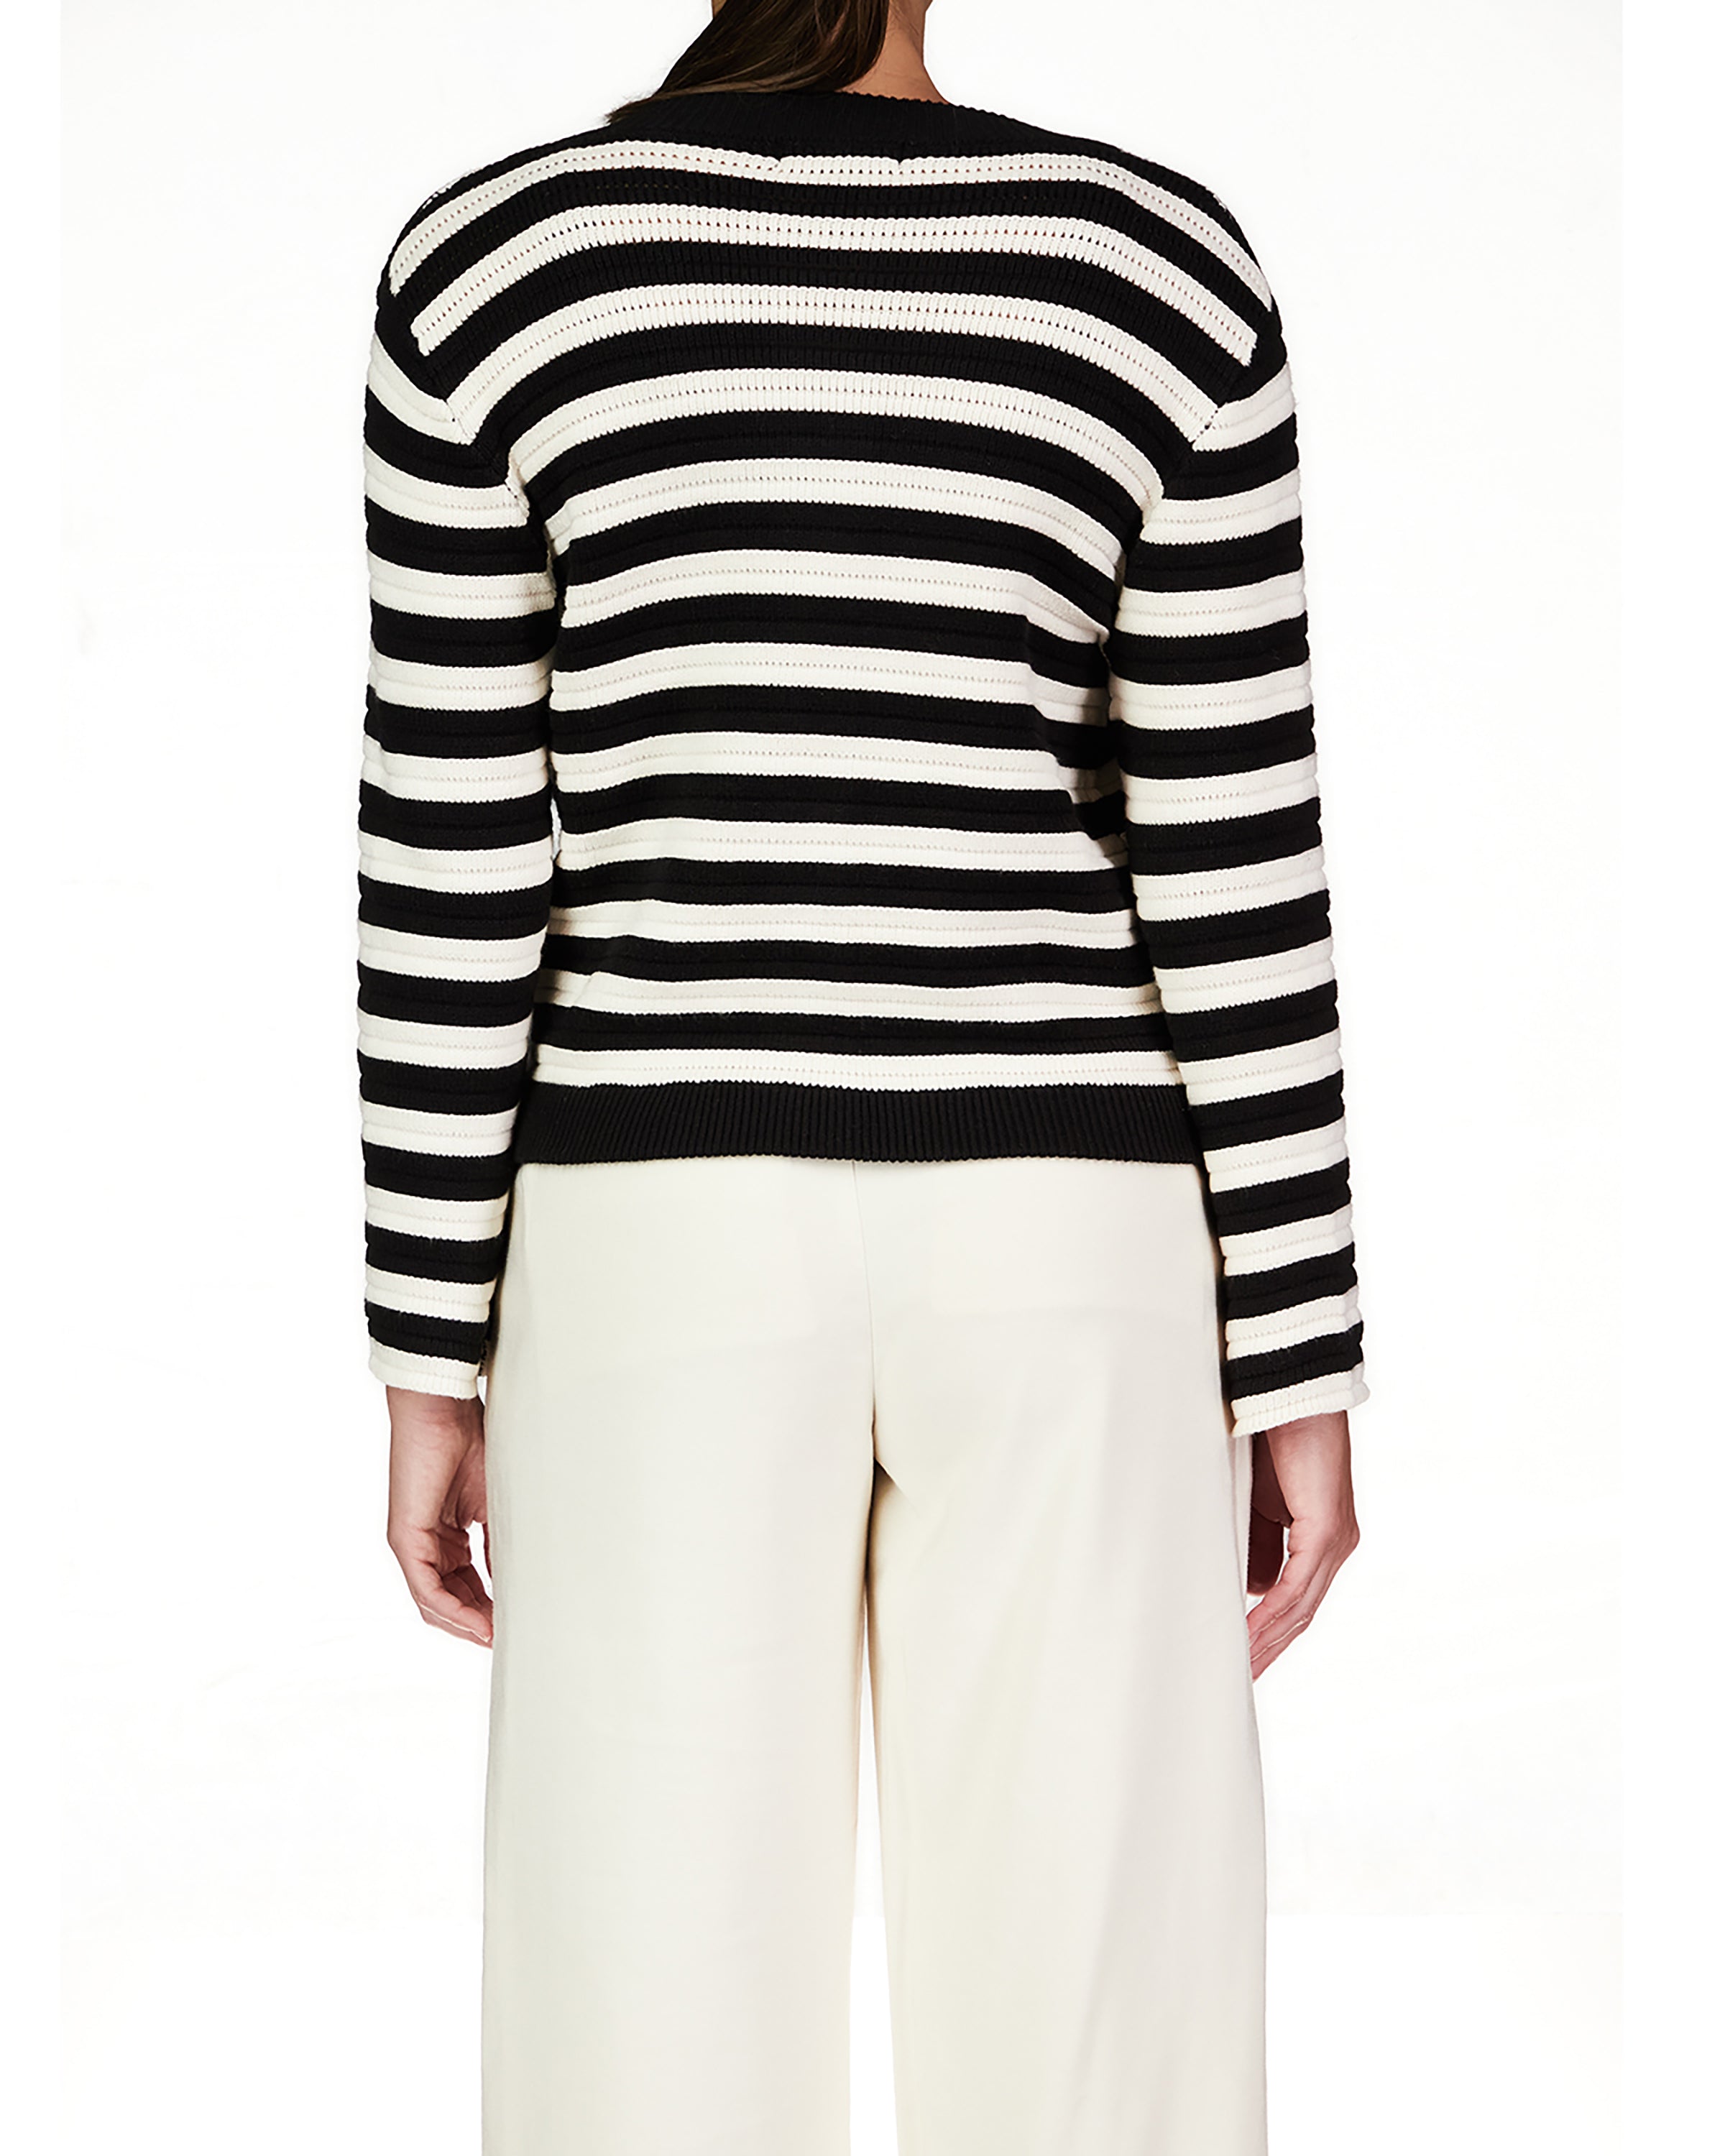 Sanctuary Knitted Jacket in Chalk and Black Stripe